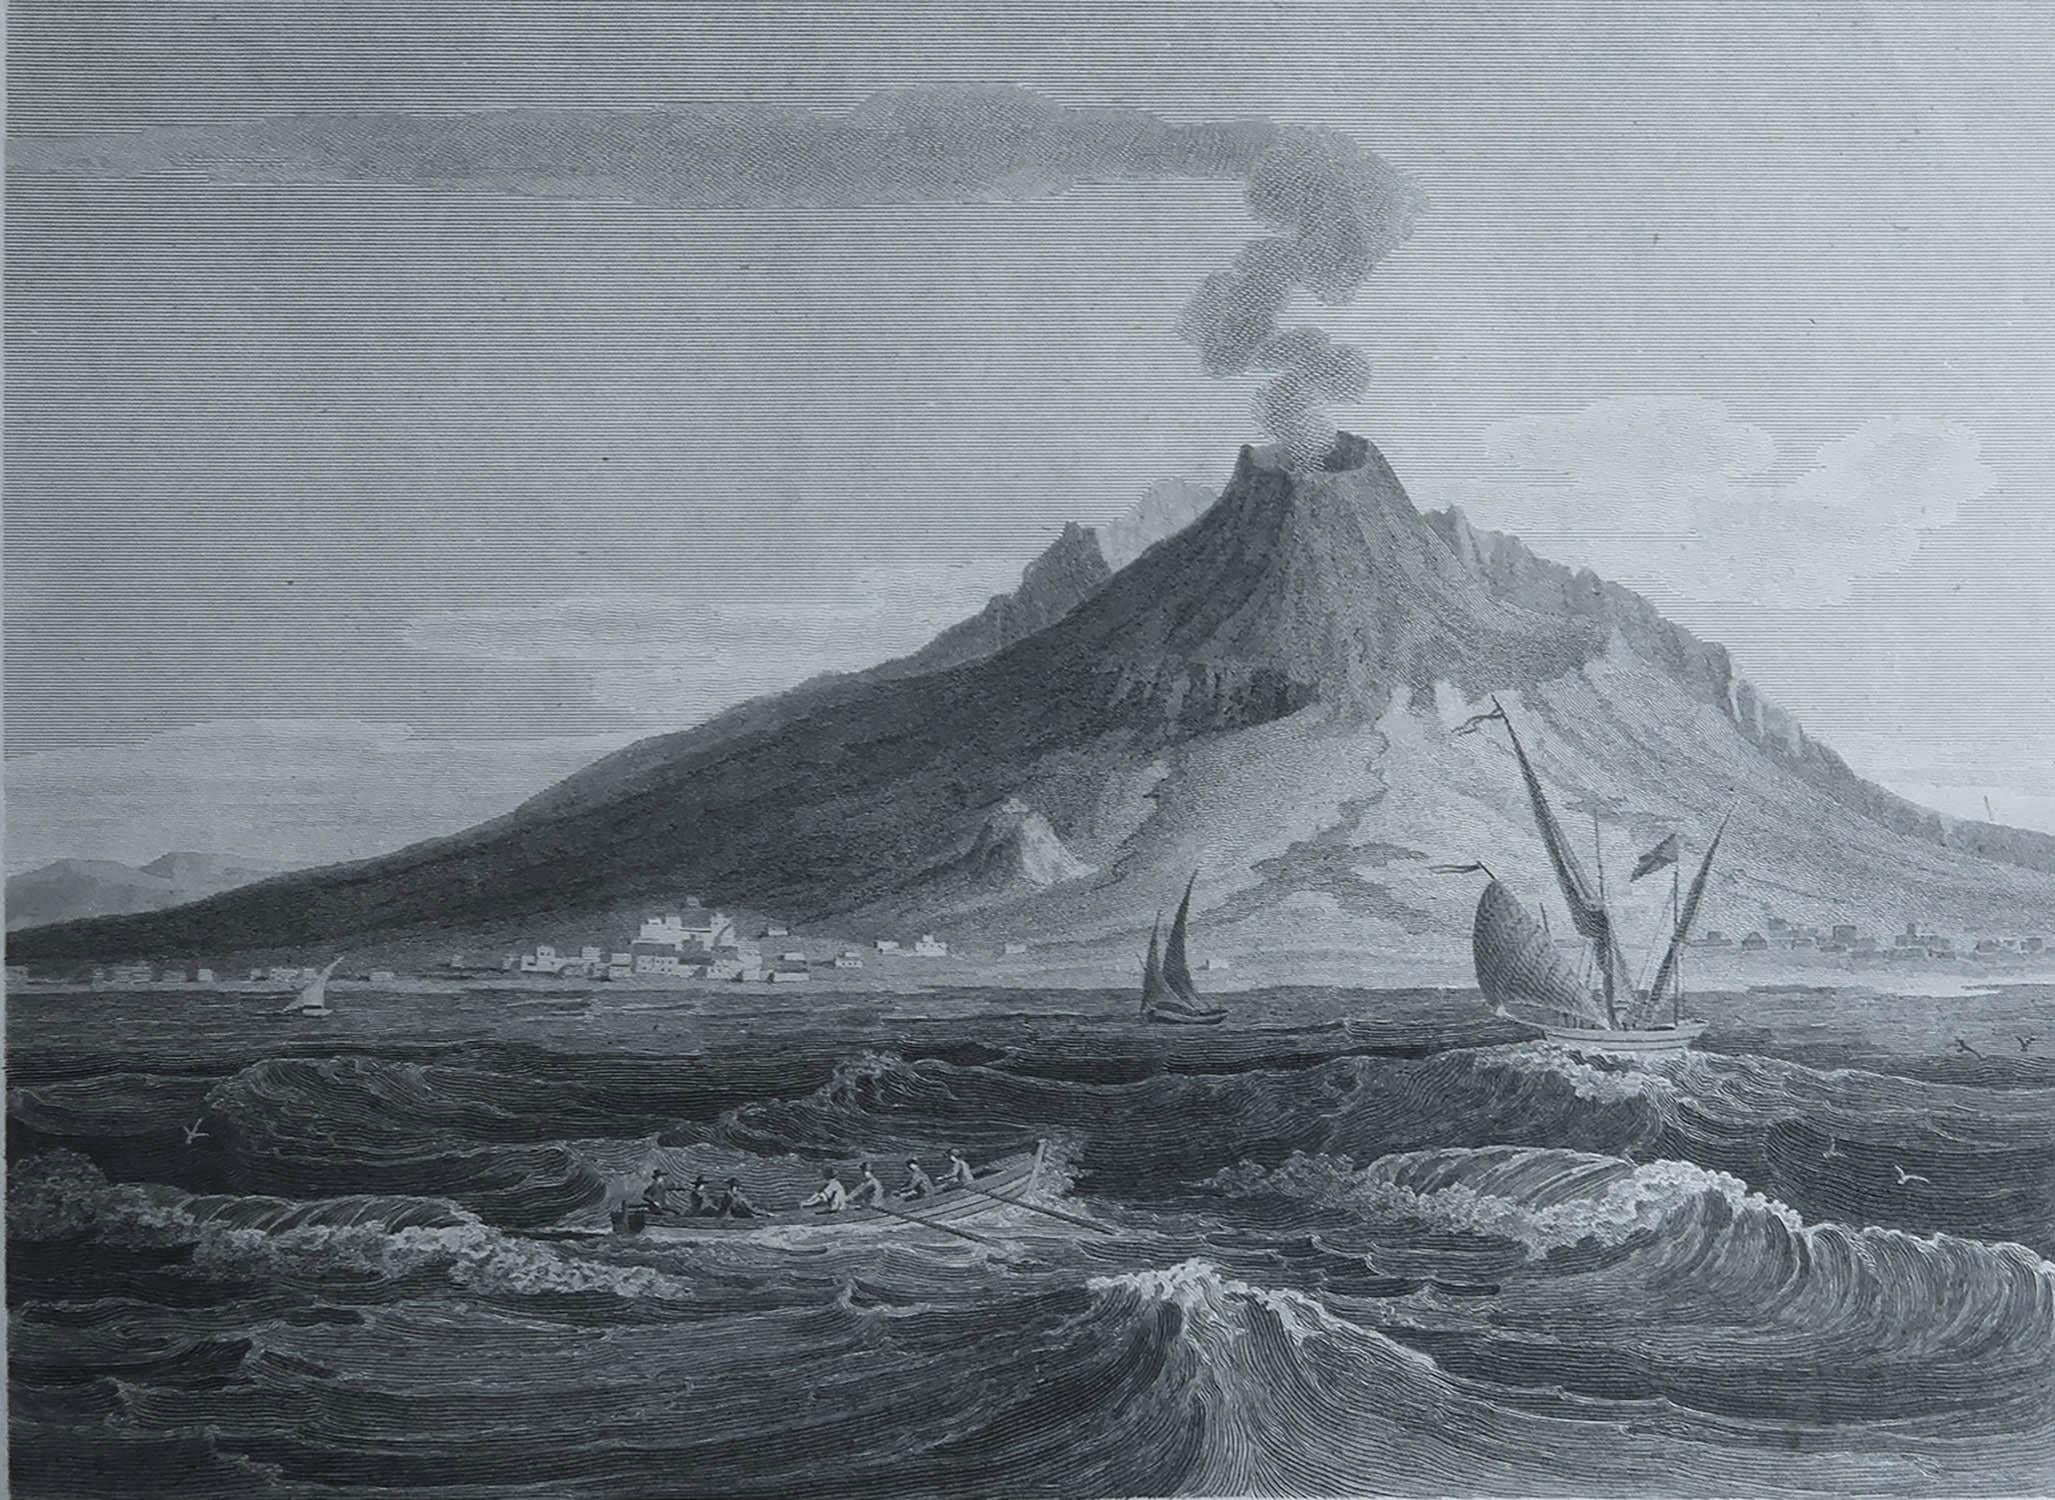 Great image of Mount Vesuvius

Copper-plate engraving by Lowry

Published by Longman & Rees, London

Dated 1802

Unframed.

Free shipping. 



